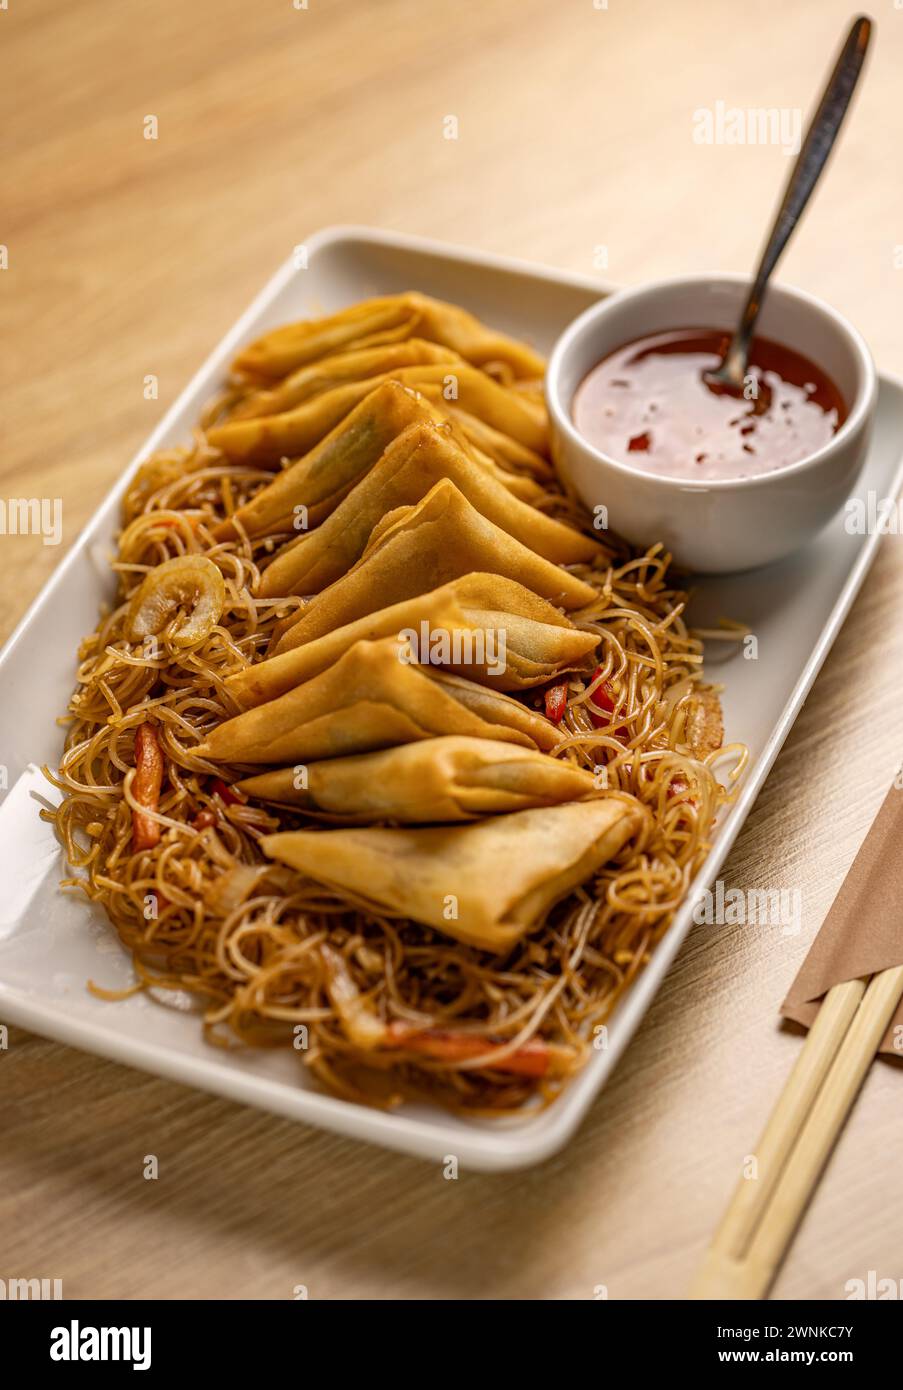 Fresh fried Chinese traditional triangle Spring rolls food with noodles Stock Photo